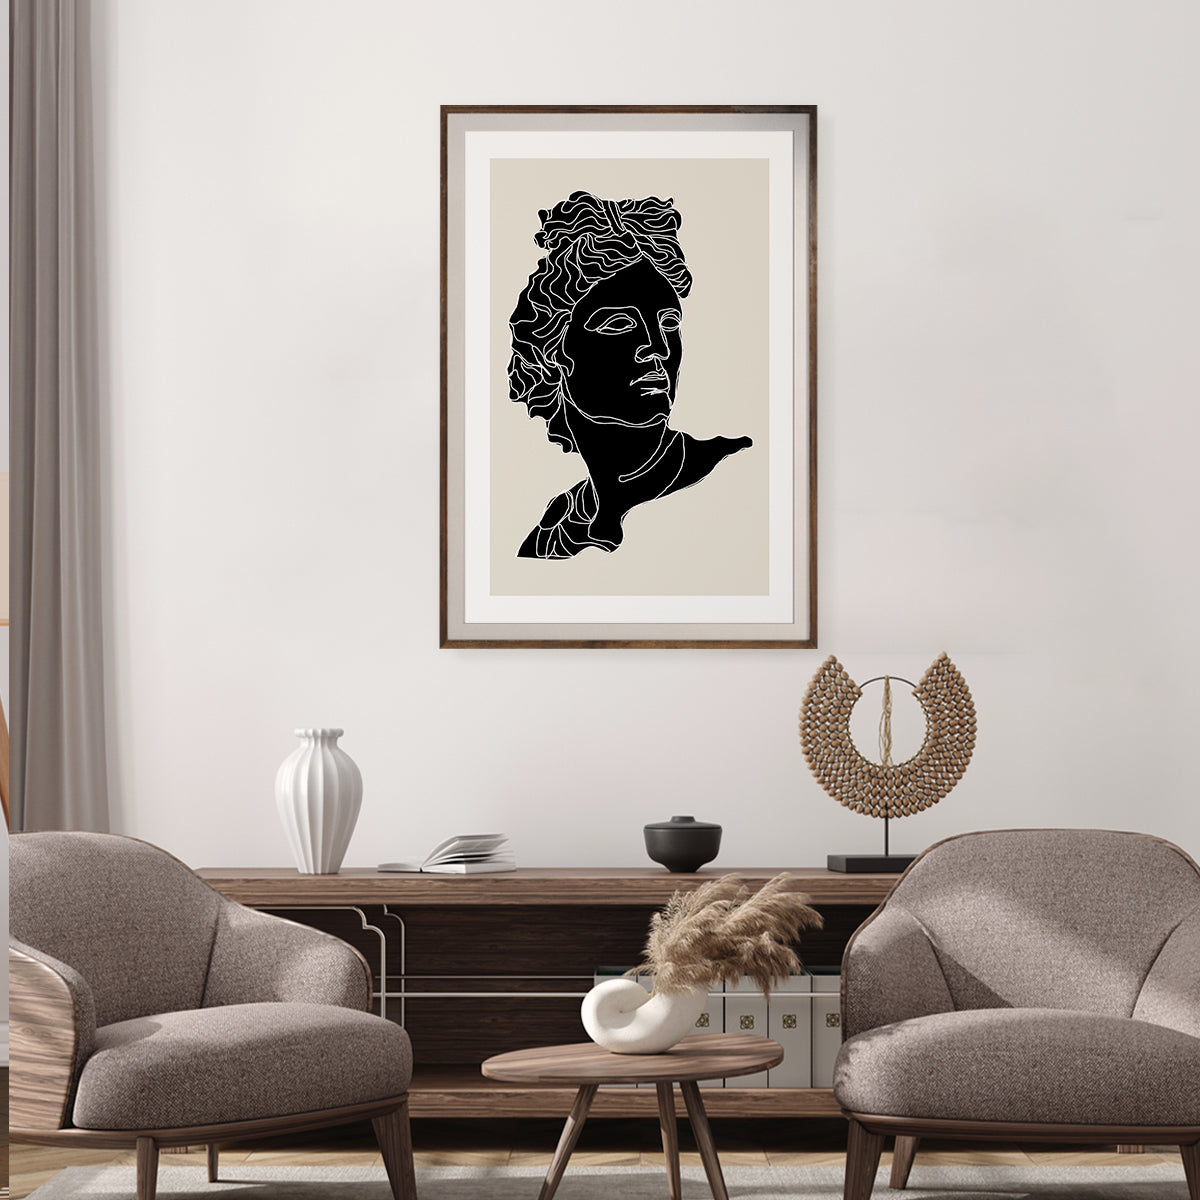 Antique Sculptures Silhouette Contemporary Minimalist Poster Wall Decor-Vertical Posters NOT FRAMED-CetArt-8″x10″ inches-CetArt